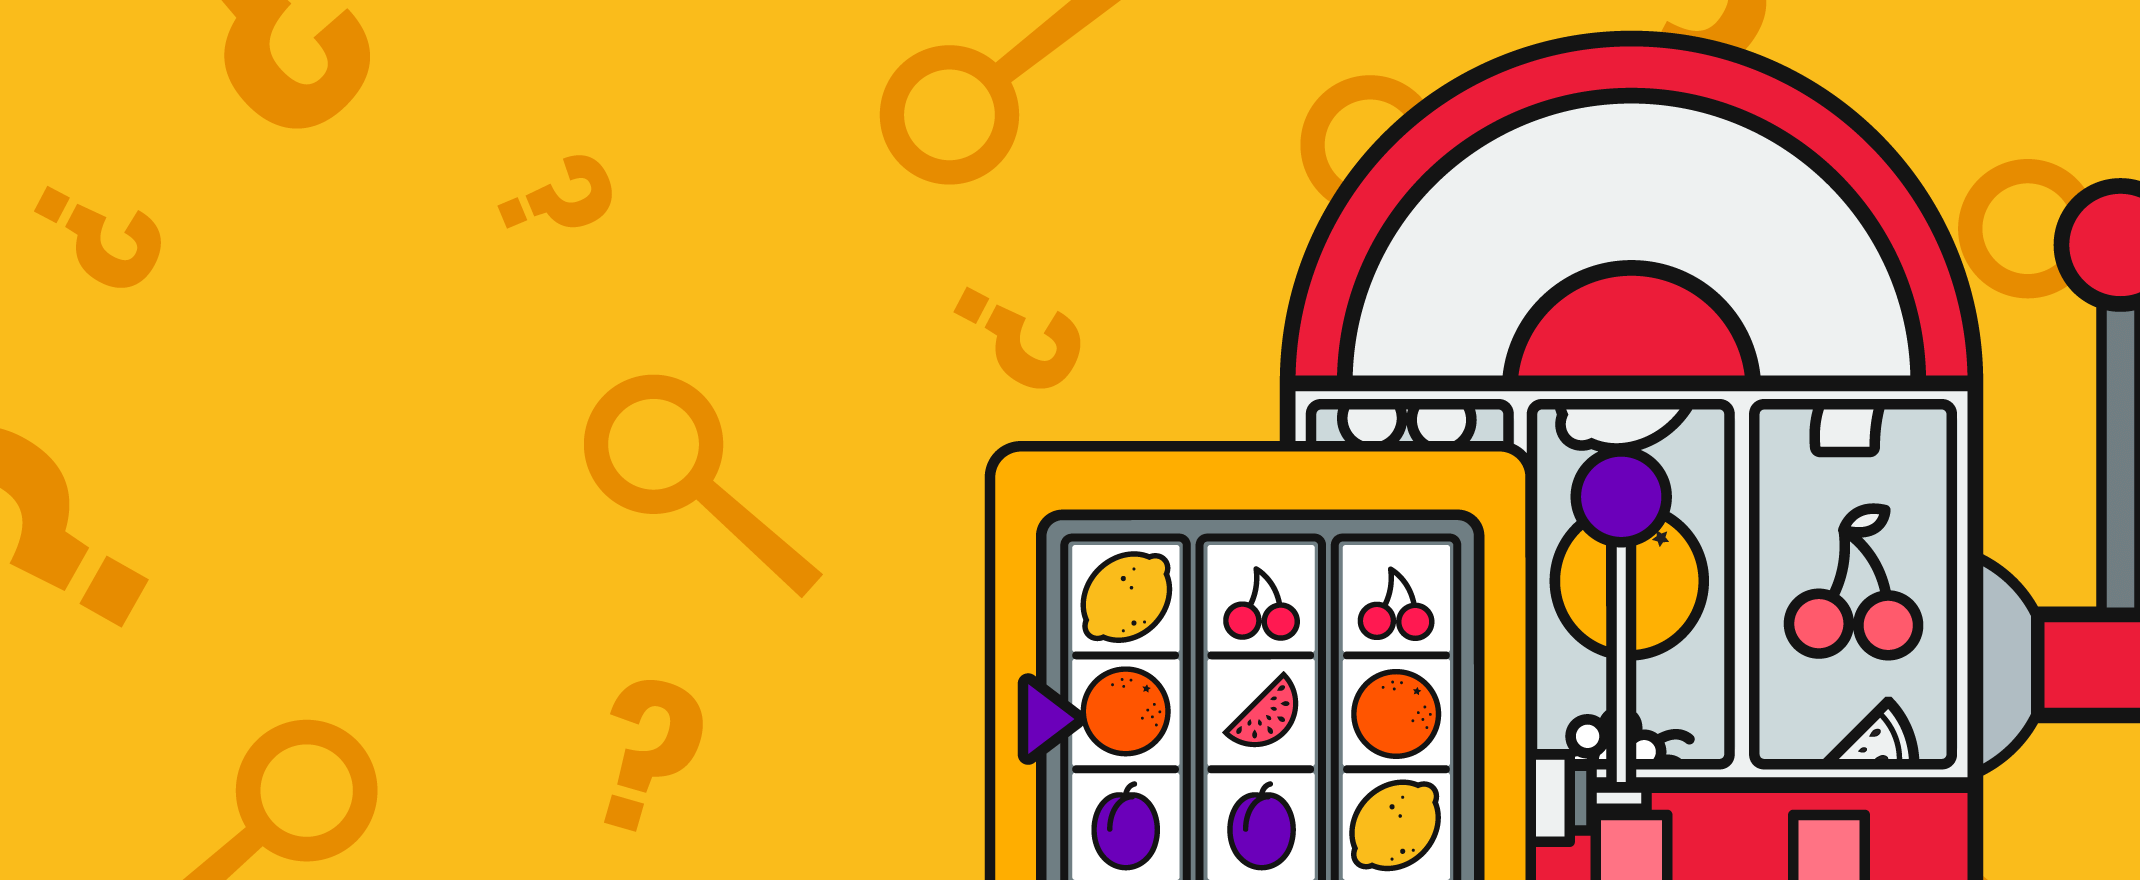 Some of the basic rules for slot game